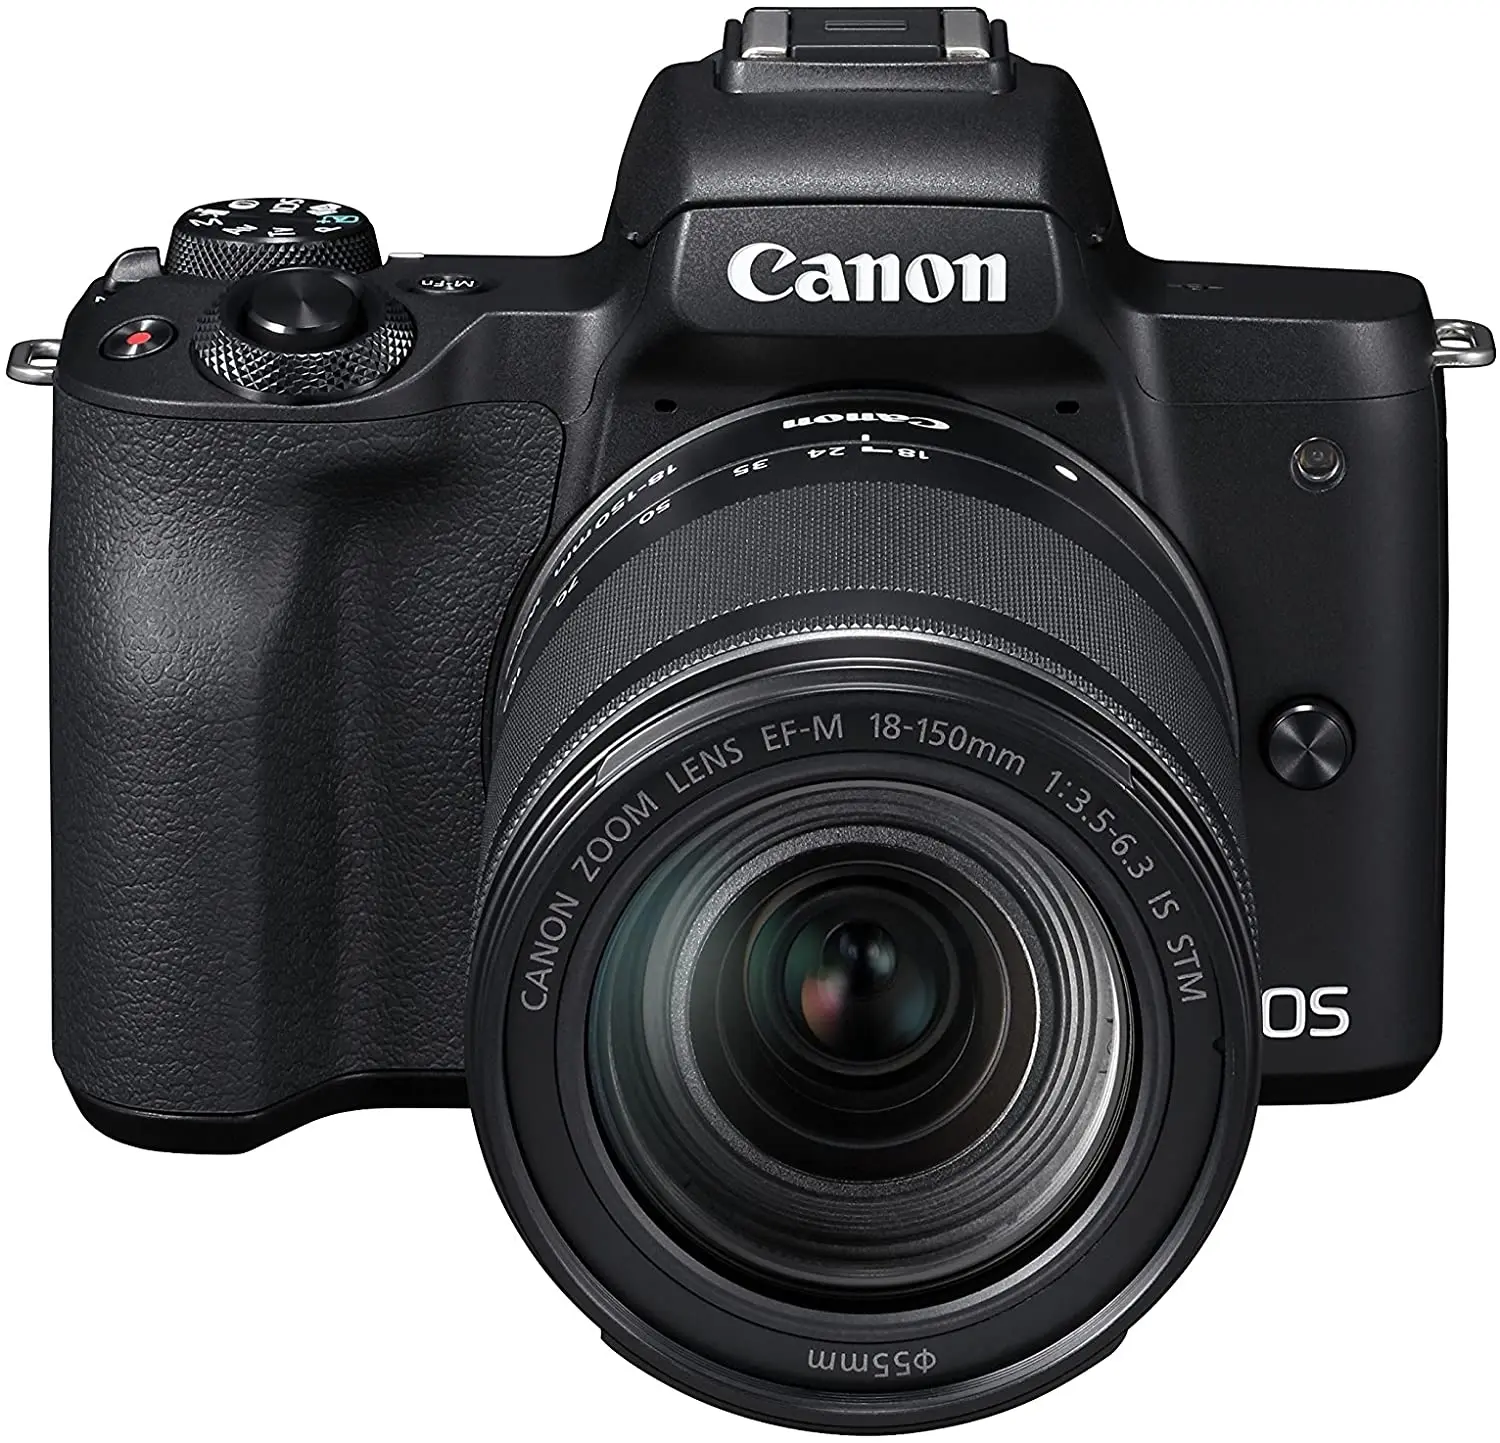 

Canon EOS M50 Mirrorless Digital Camera Black with EF-M 18-150mm f/3.5-6.3 IS STM Lens Black